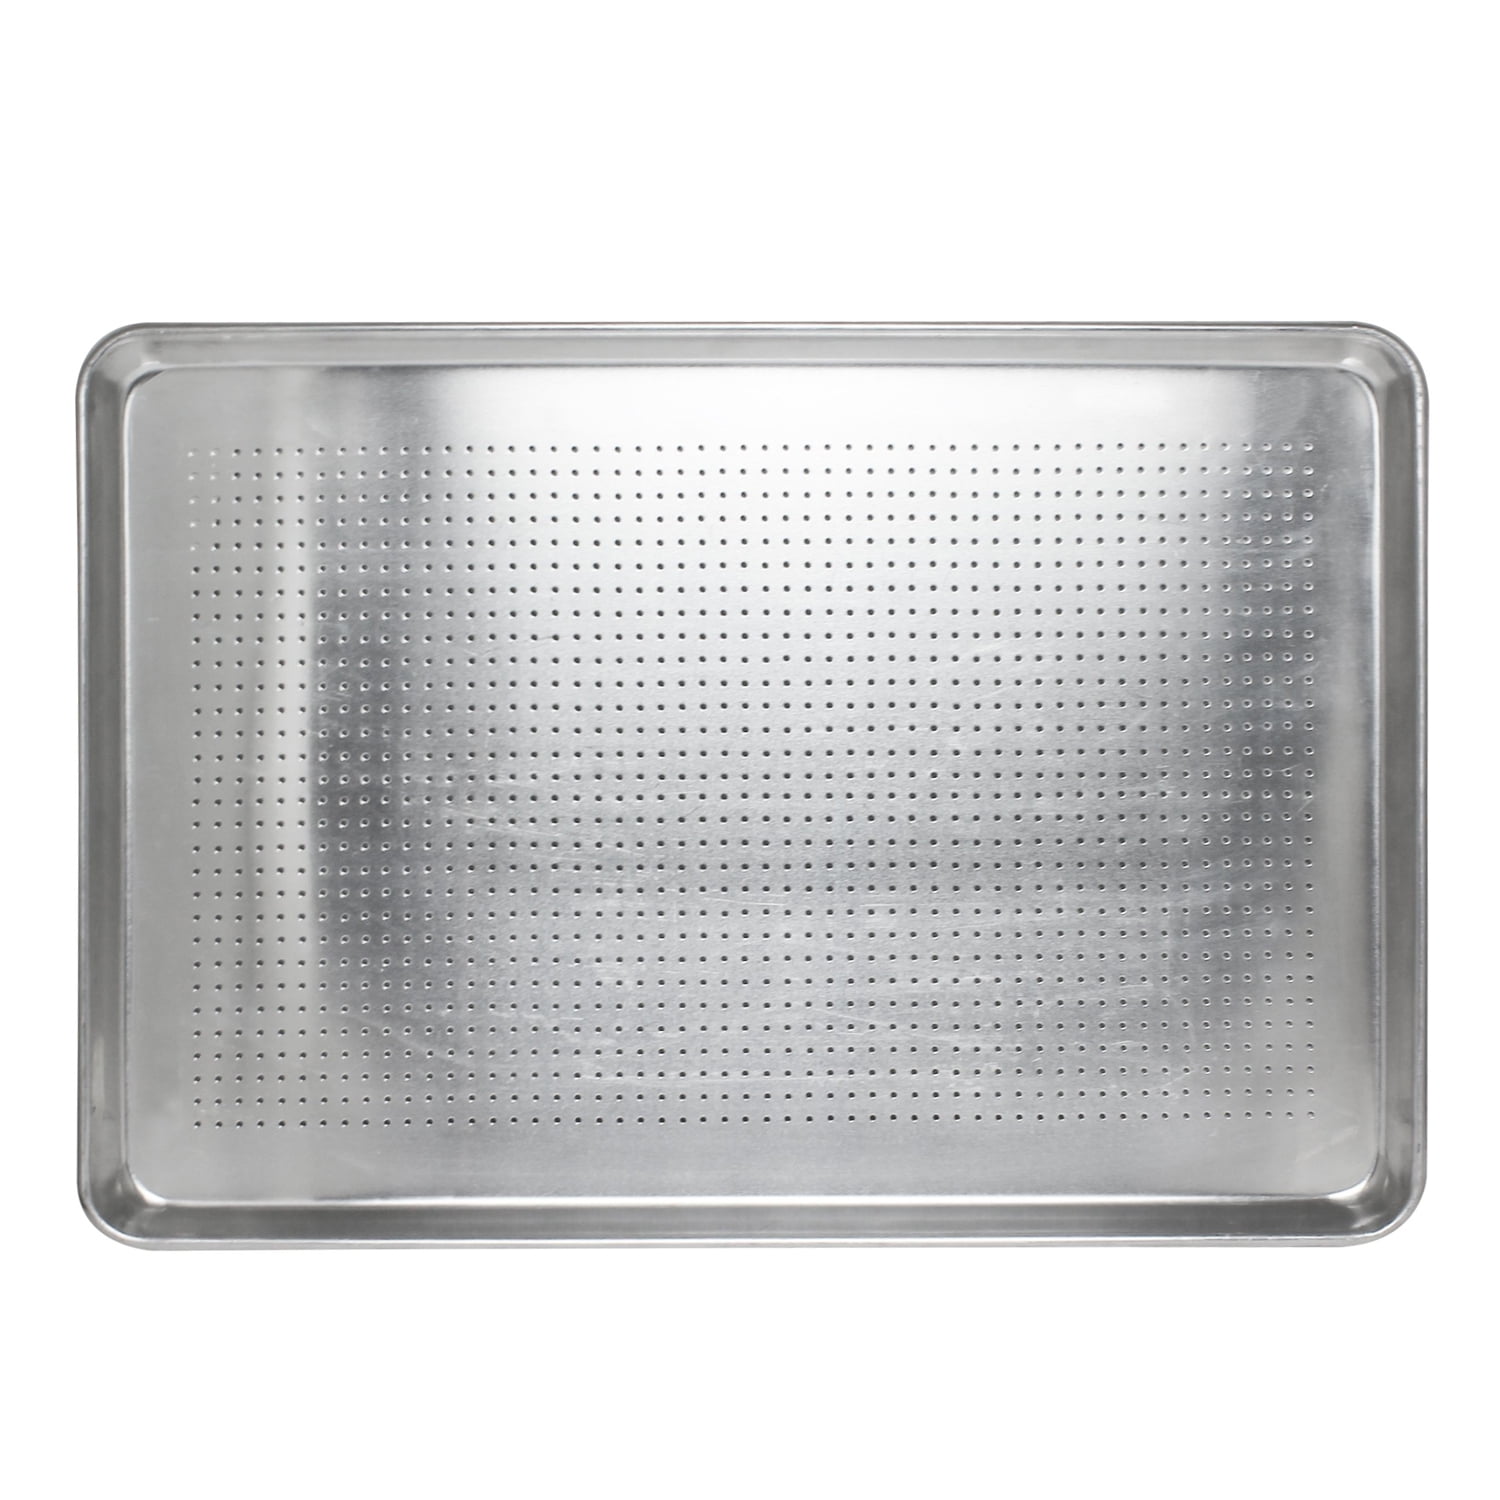 Chef Approved 19GHALFPERF Chef Approved 13 X 18 1/2 Size Closed Bead  Perforated 20 Gauge Aluminum Sheet Pan.